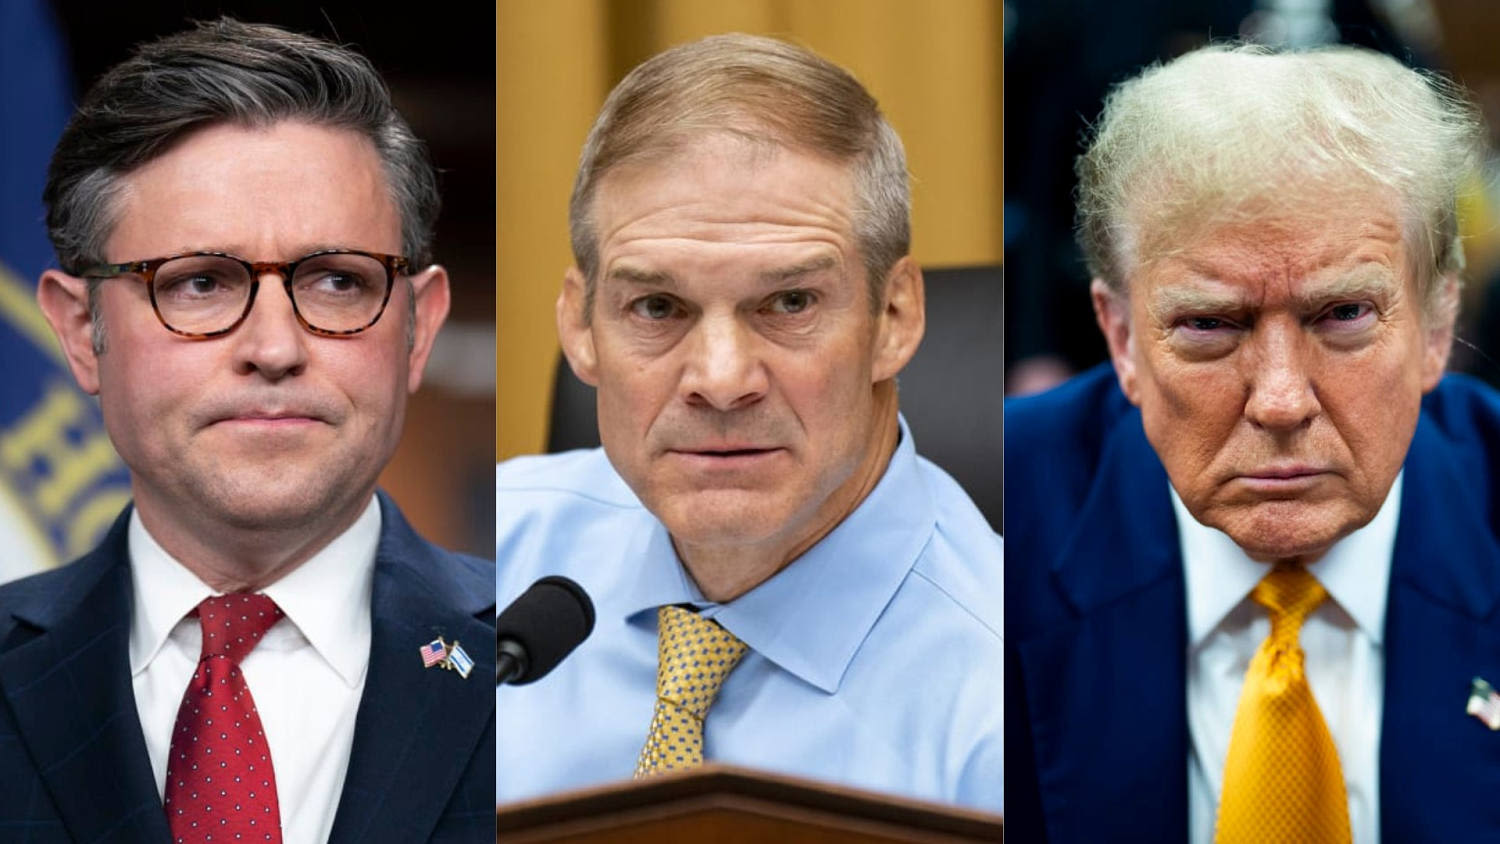 ‘There is no line’: Speaker Johnson, Jim Jordan and others push back against Trump conviction